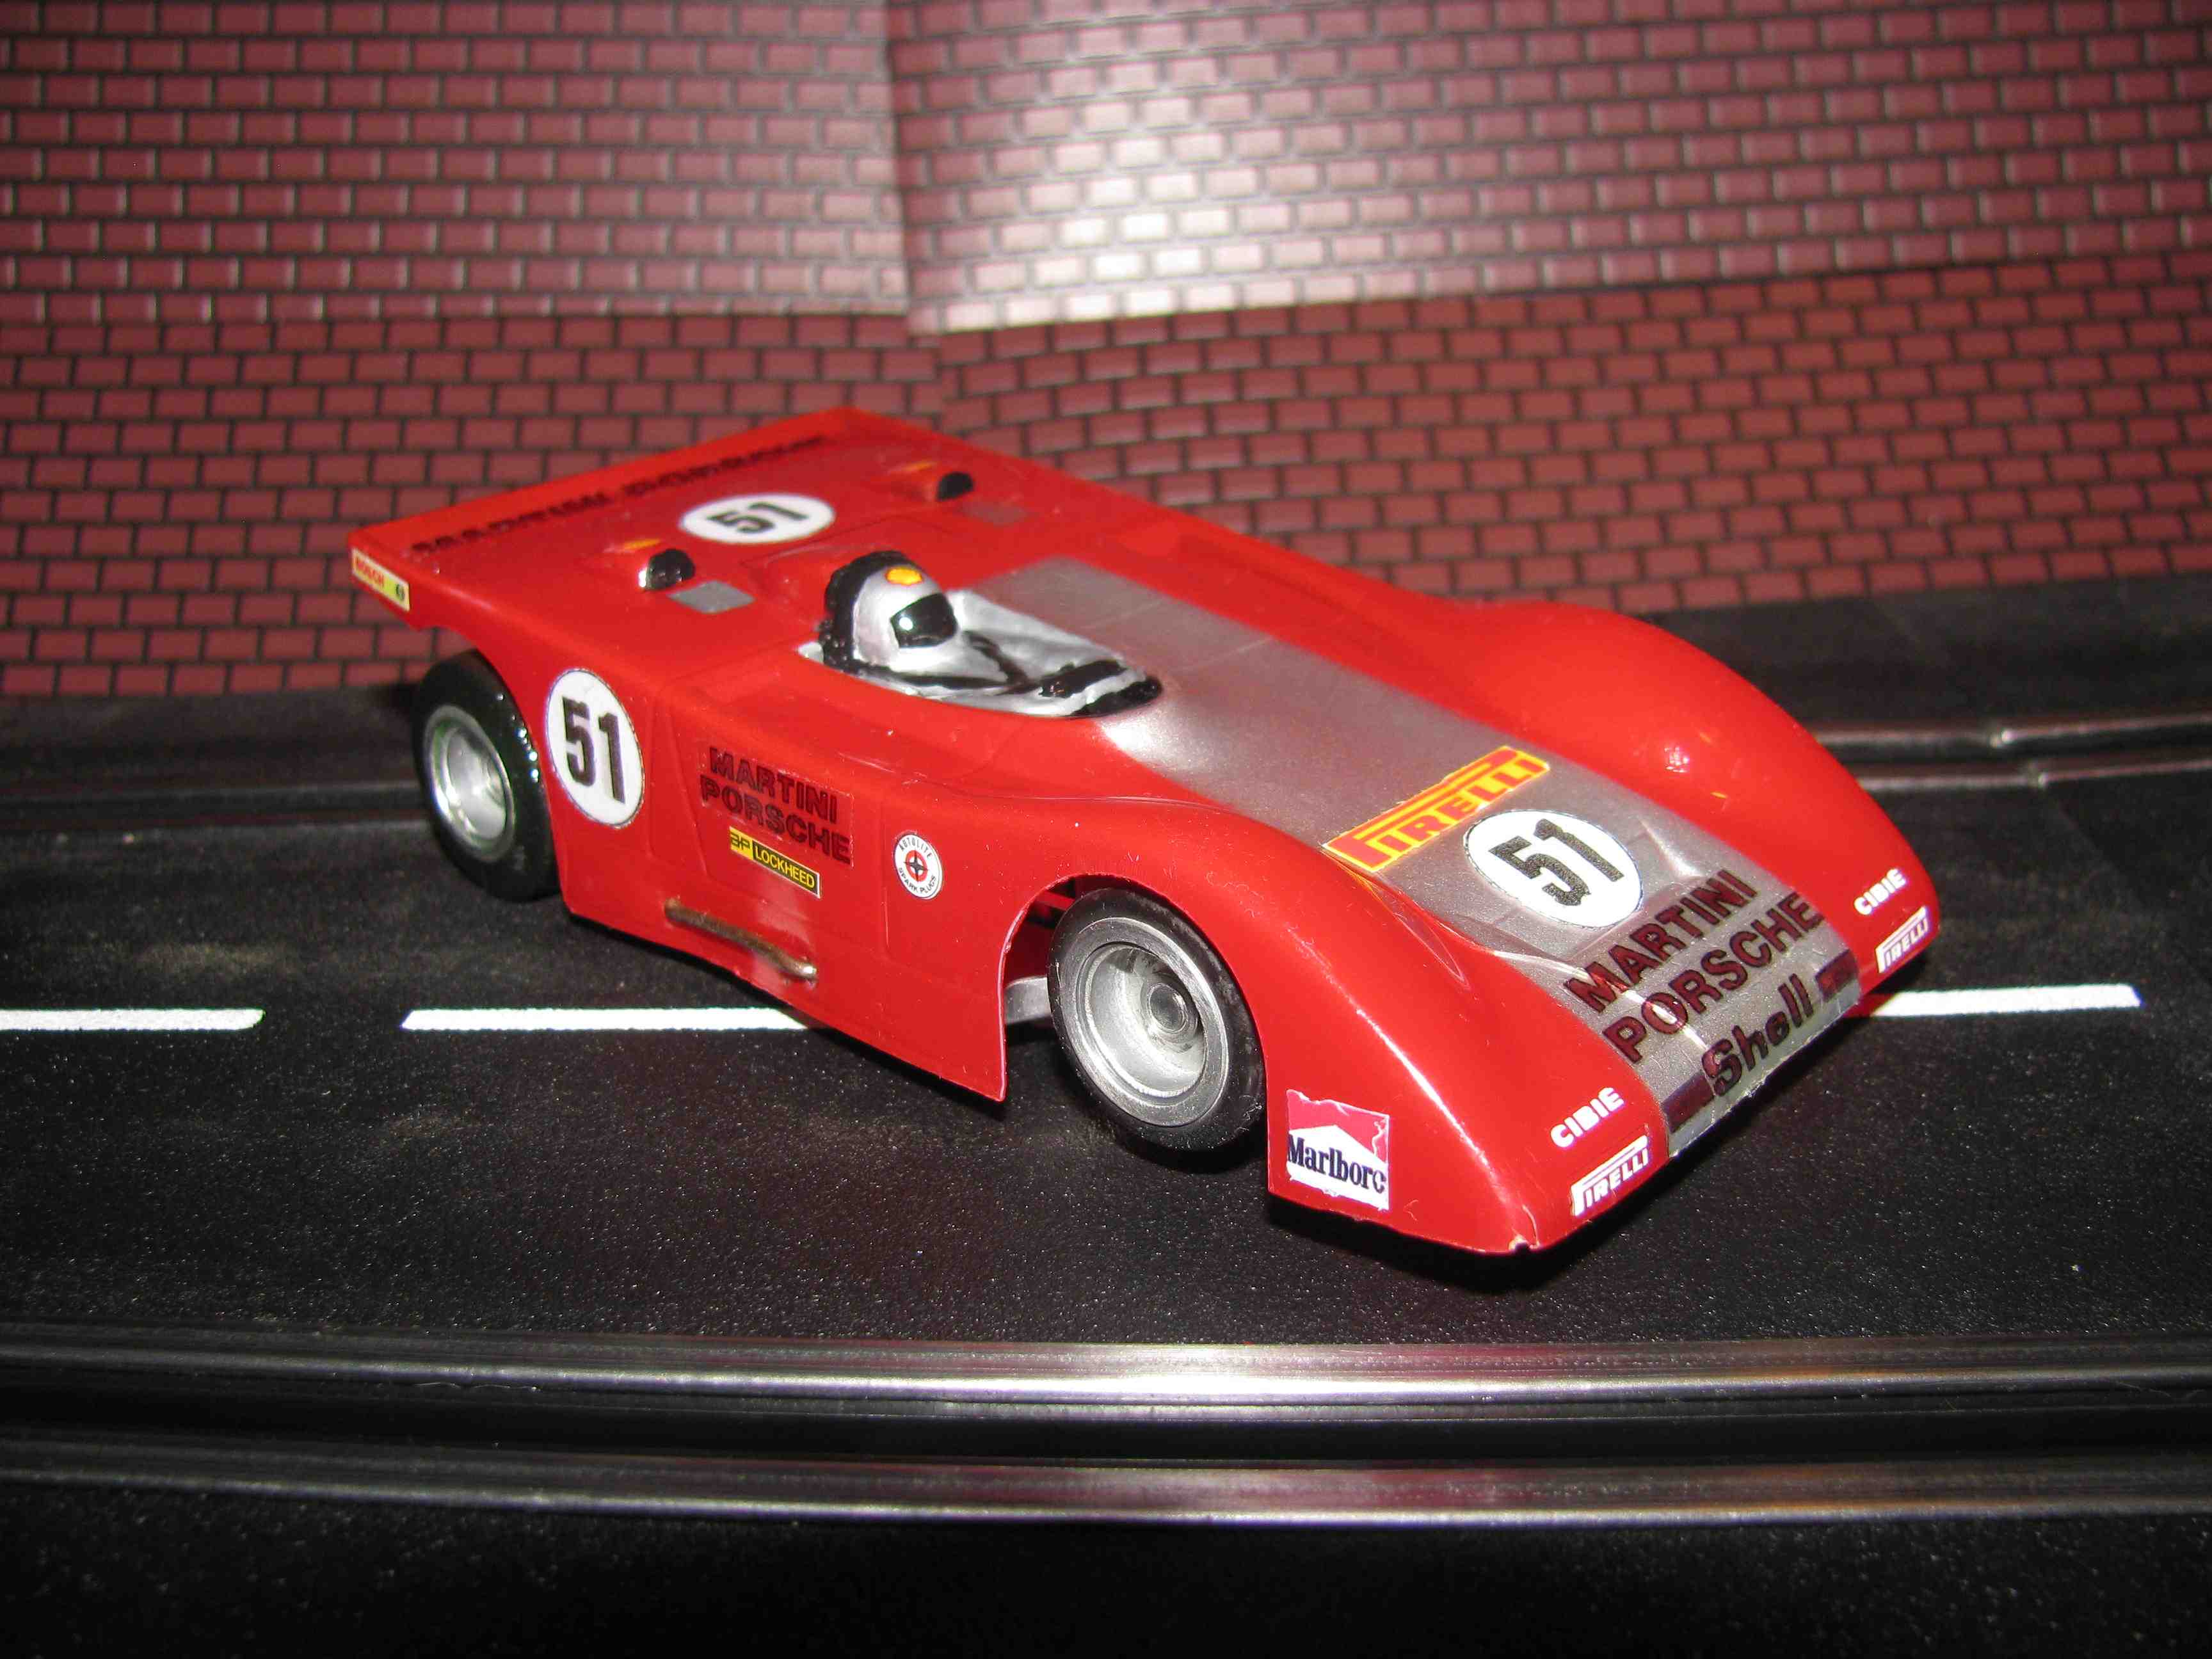 * SOLD * RIGGEN Vintage CAN-AM PRO-AM Slot Car in Red with classic single silver stripe – Car 51 